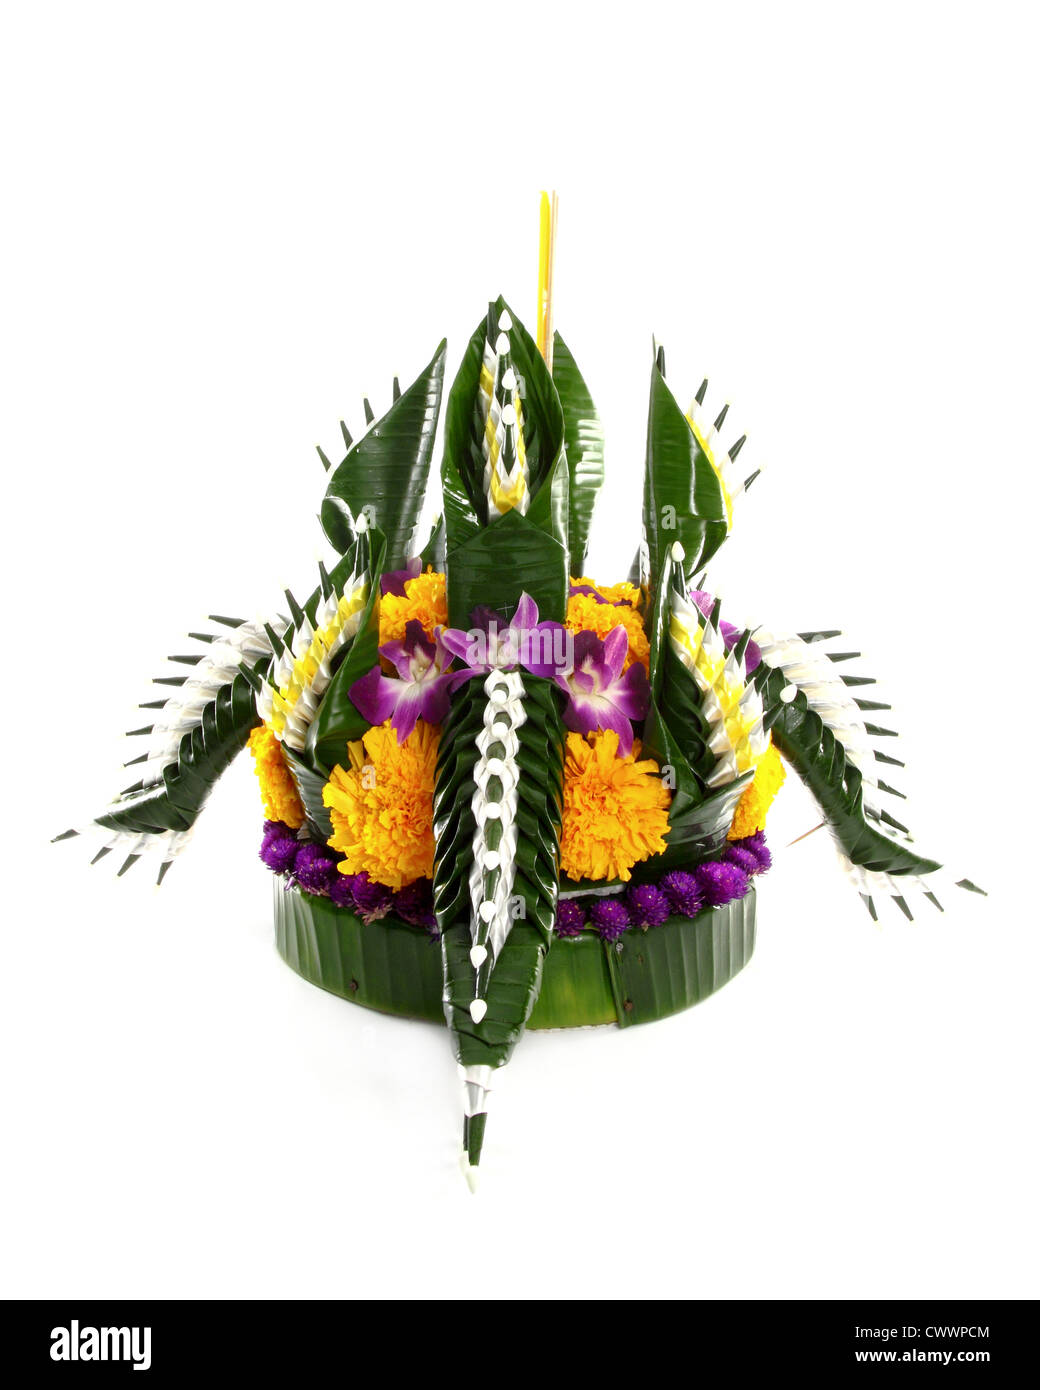 Loy kratong Festival in Thailand, on white background Stock Photo